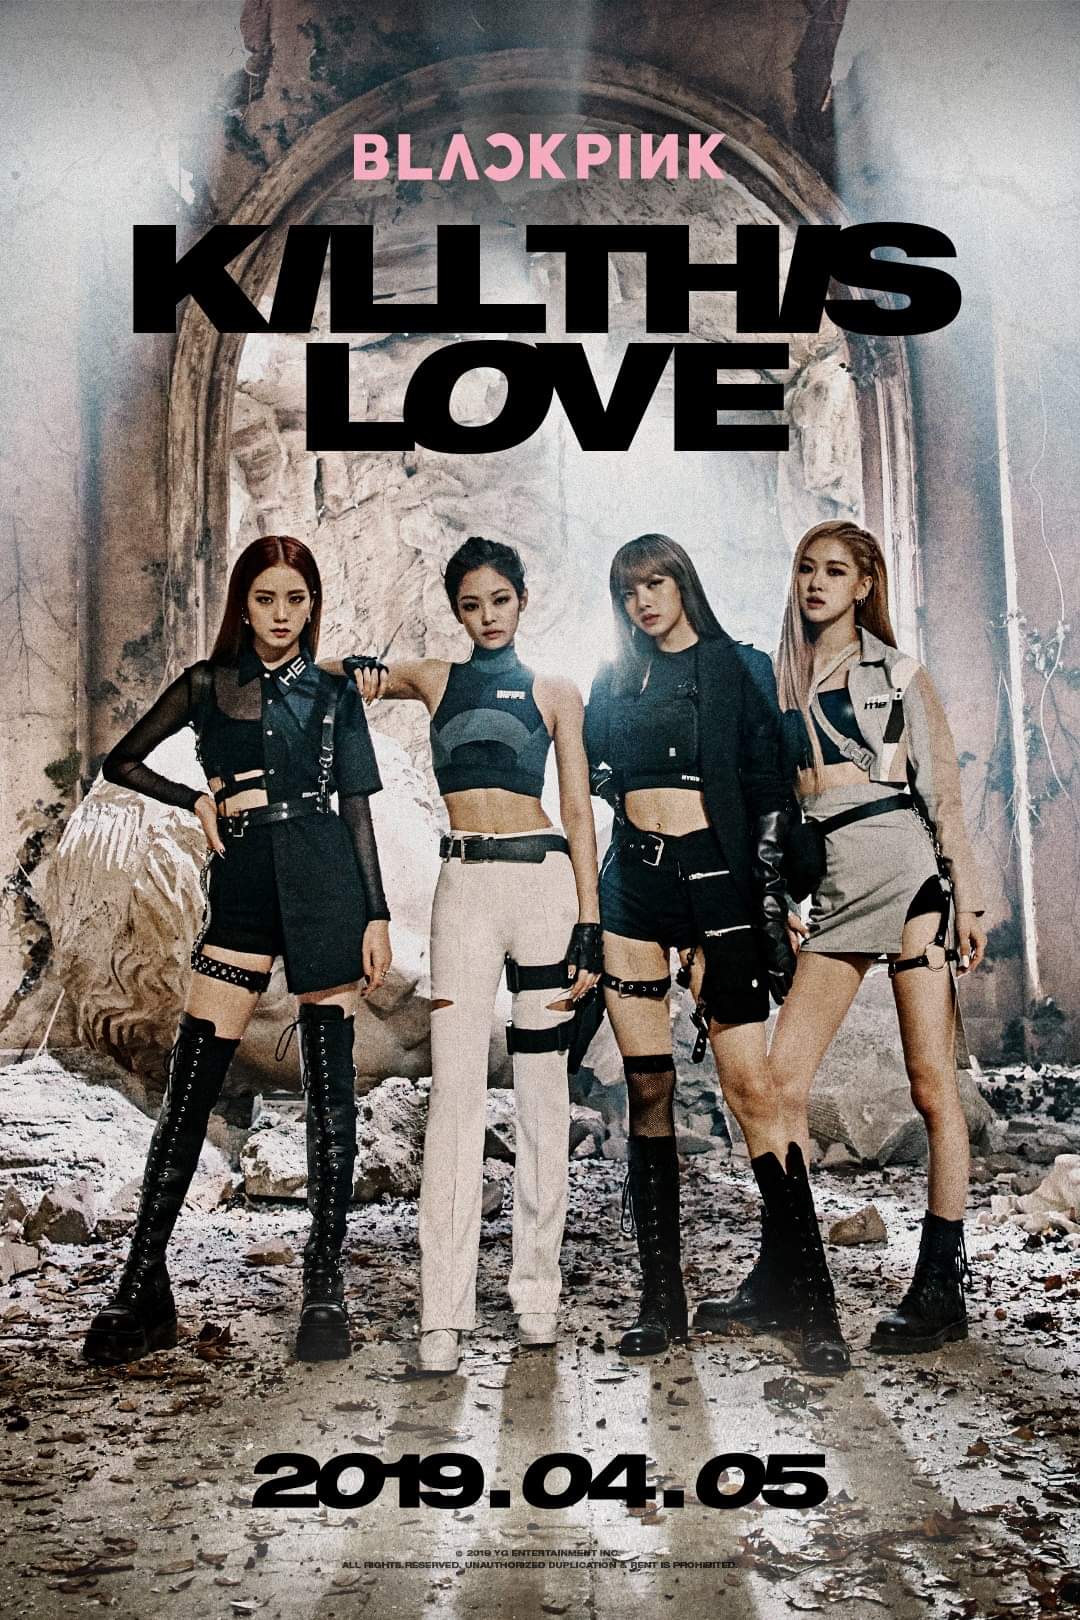 BLACKPINK This Love Poster Pink Photo